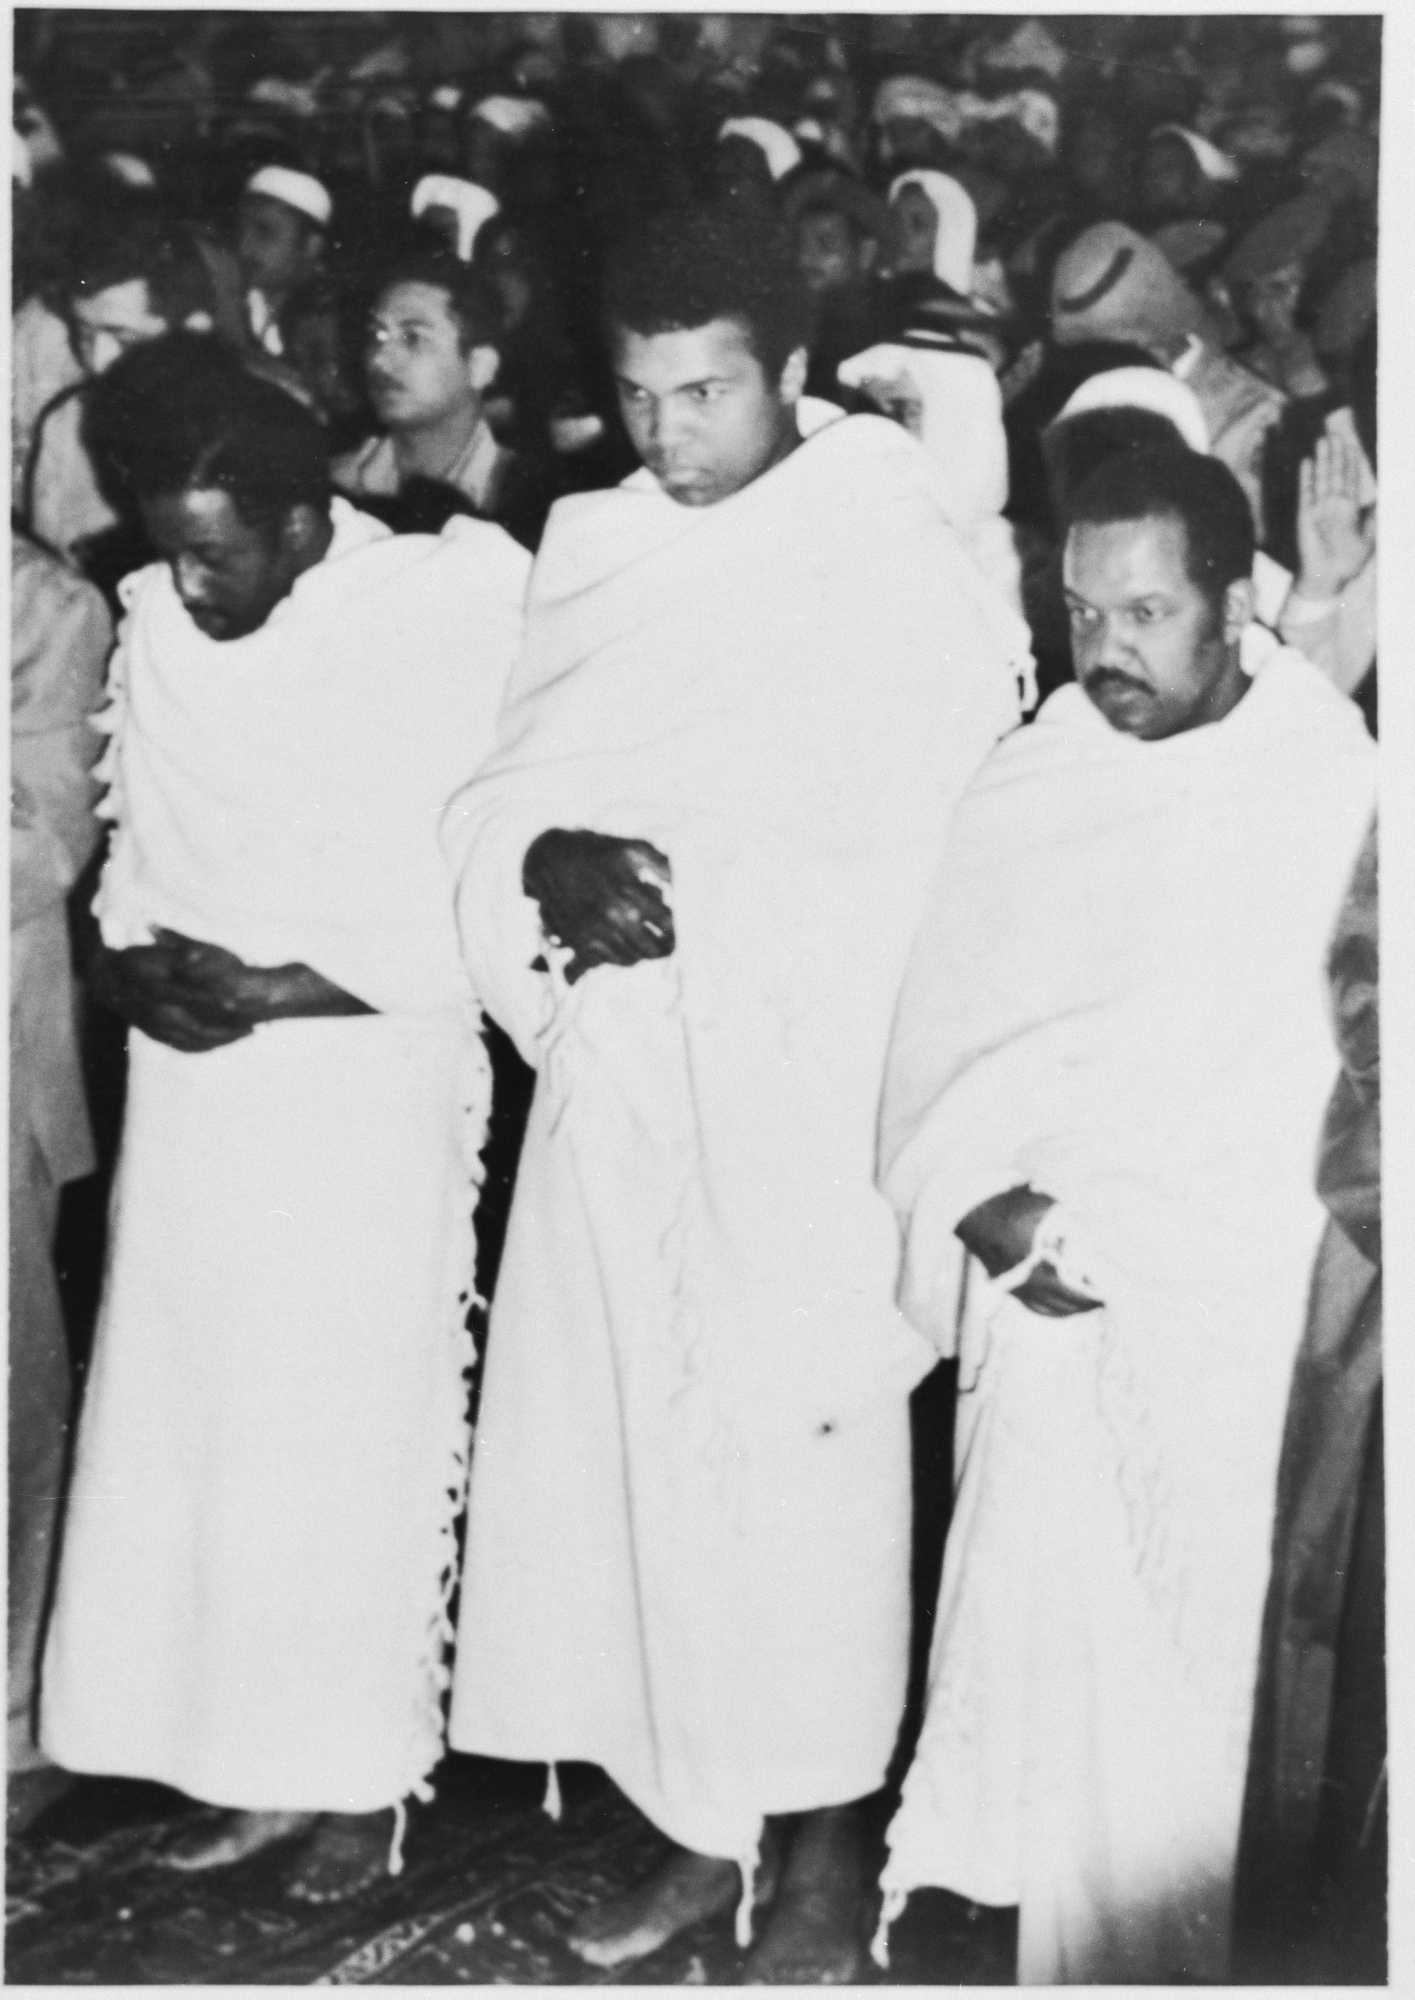 Black and White photograph of three men at Mecca